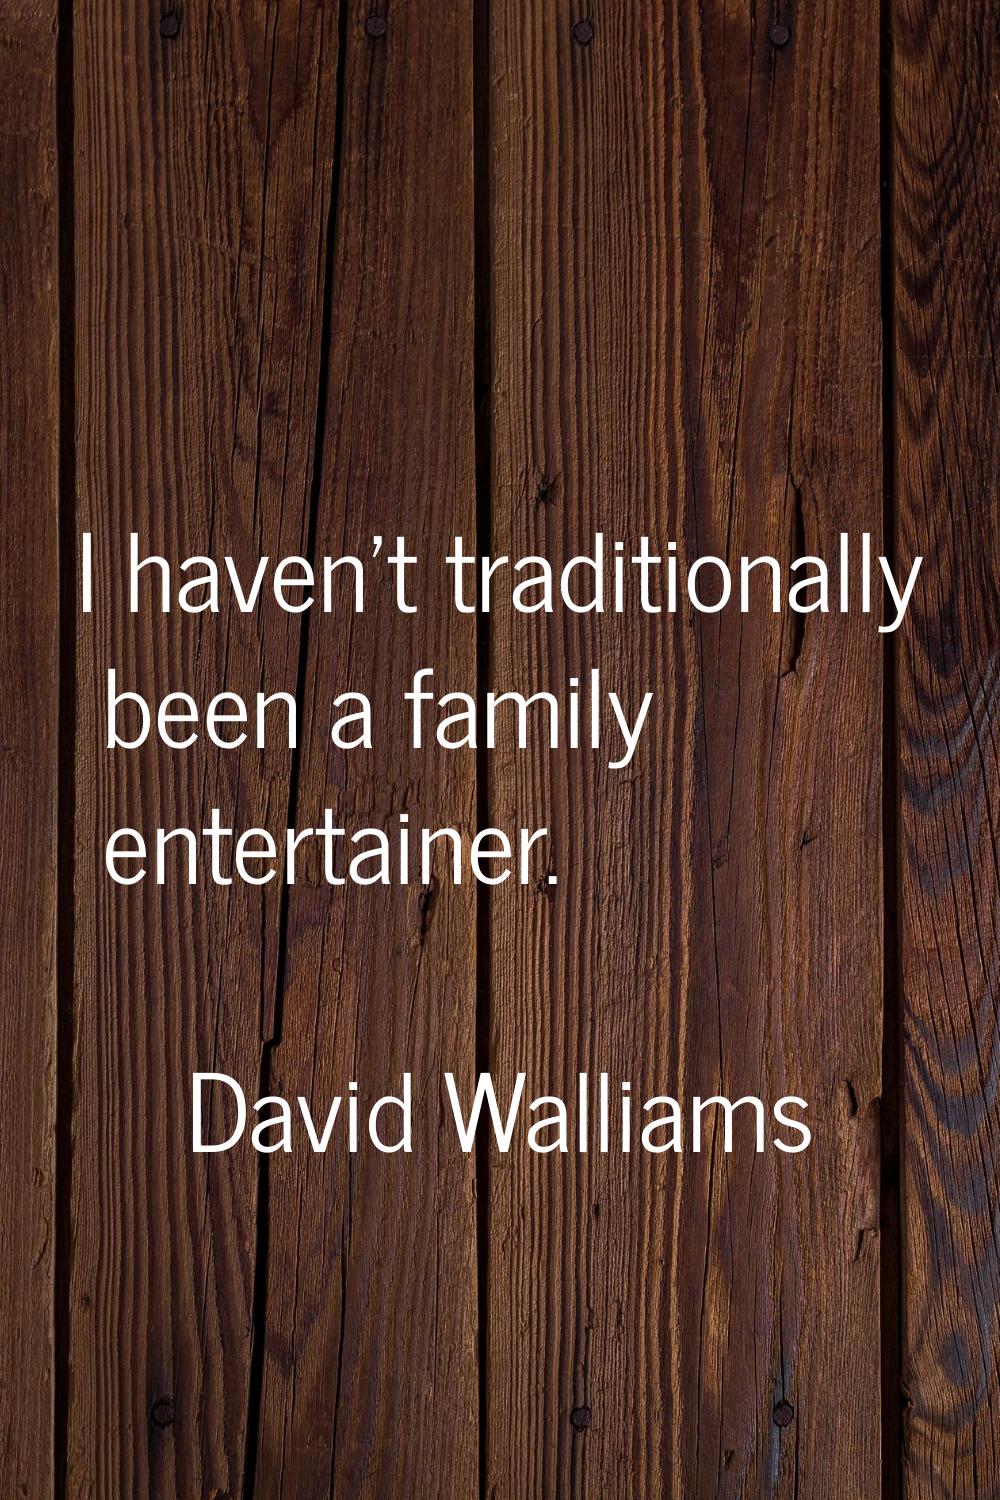 I haven't traditionally been a family entertainer.